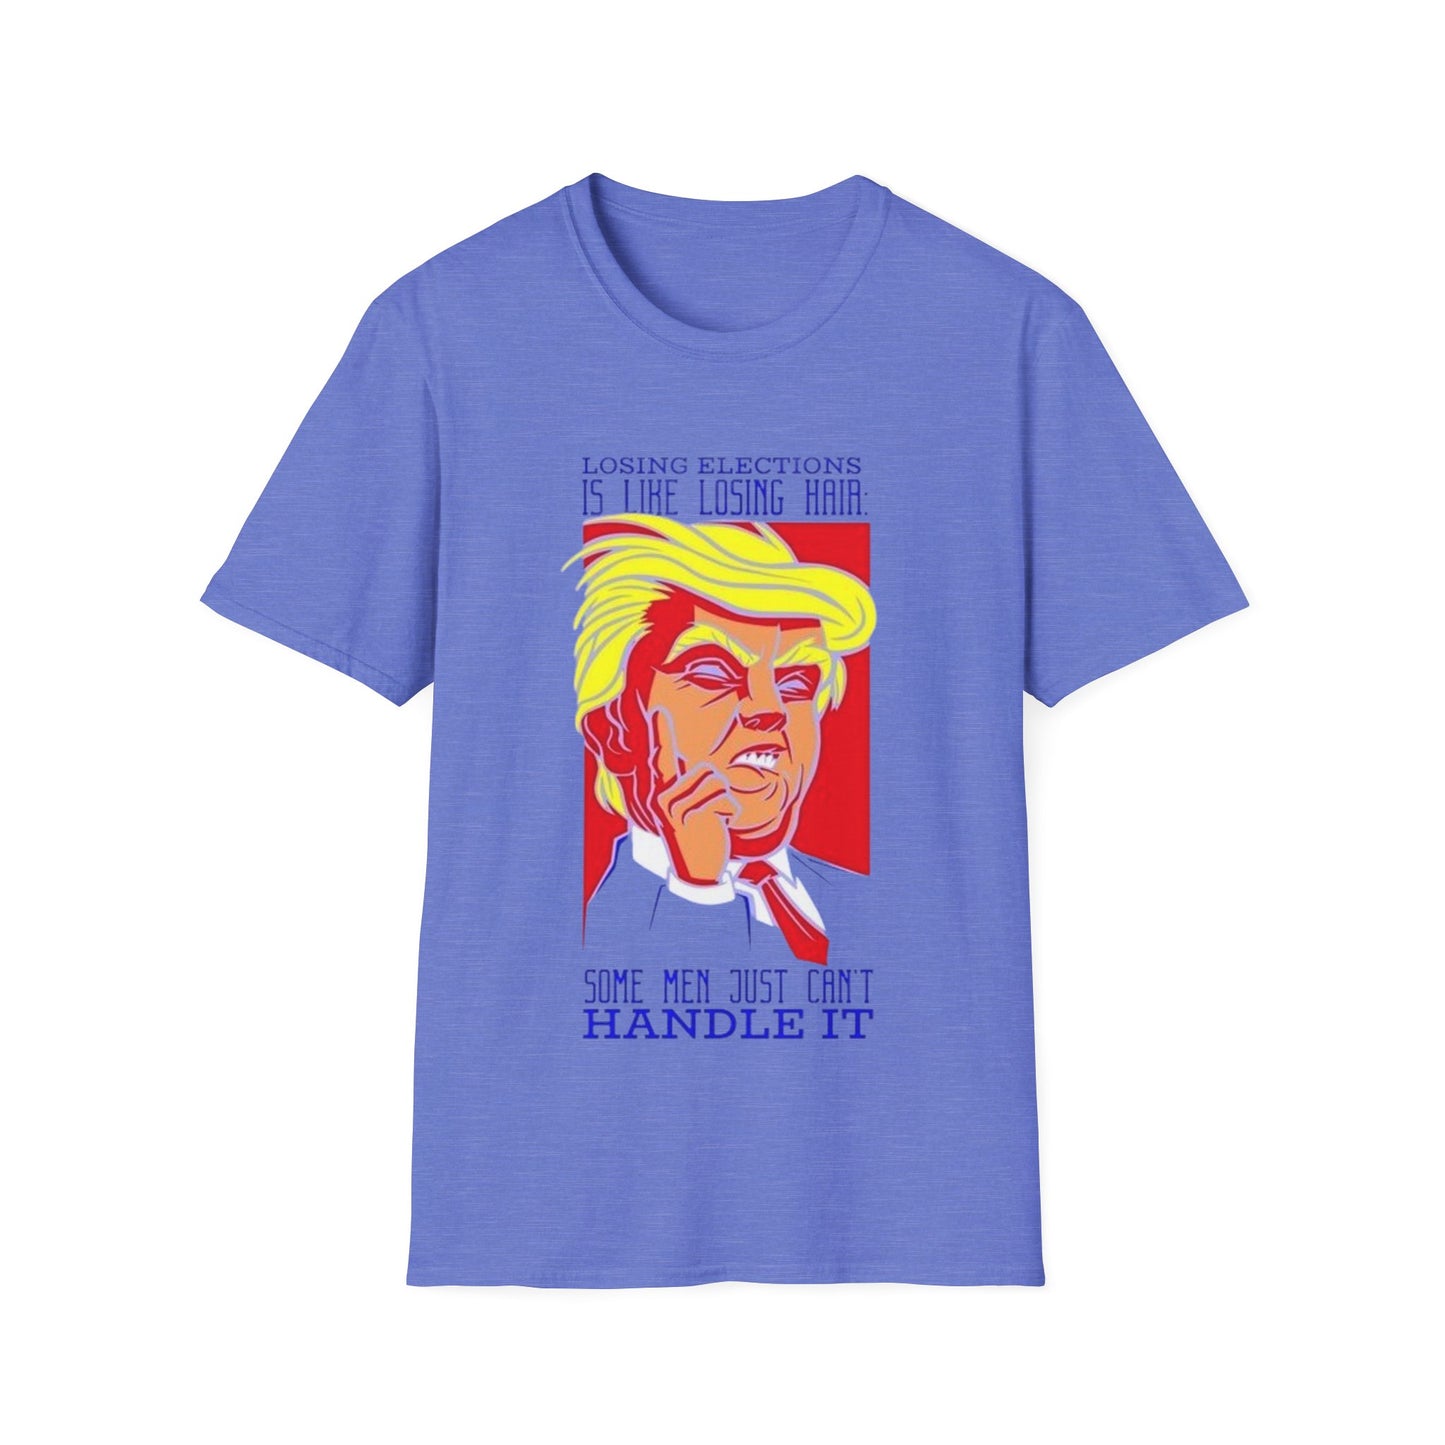 Losing Elections is like losing hair... - Unisex Softstyle T-Shirt